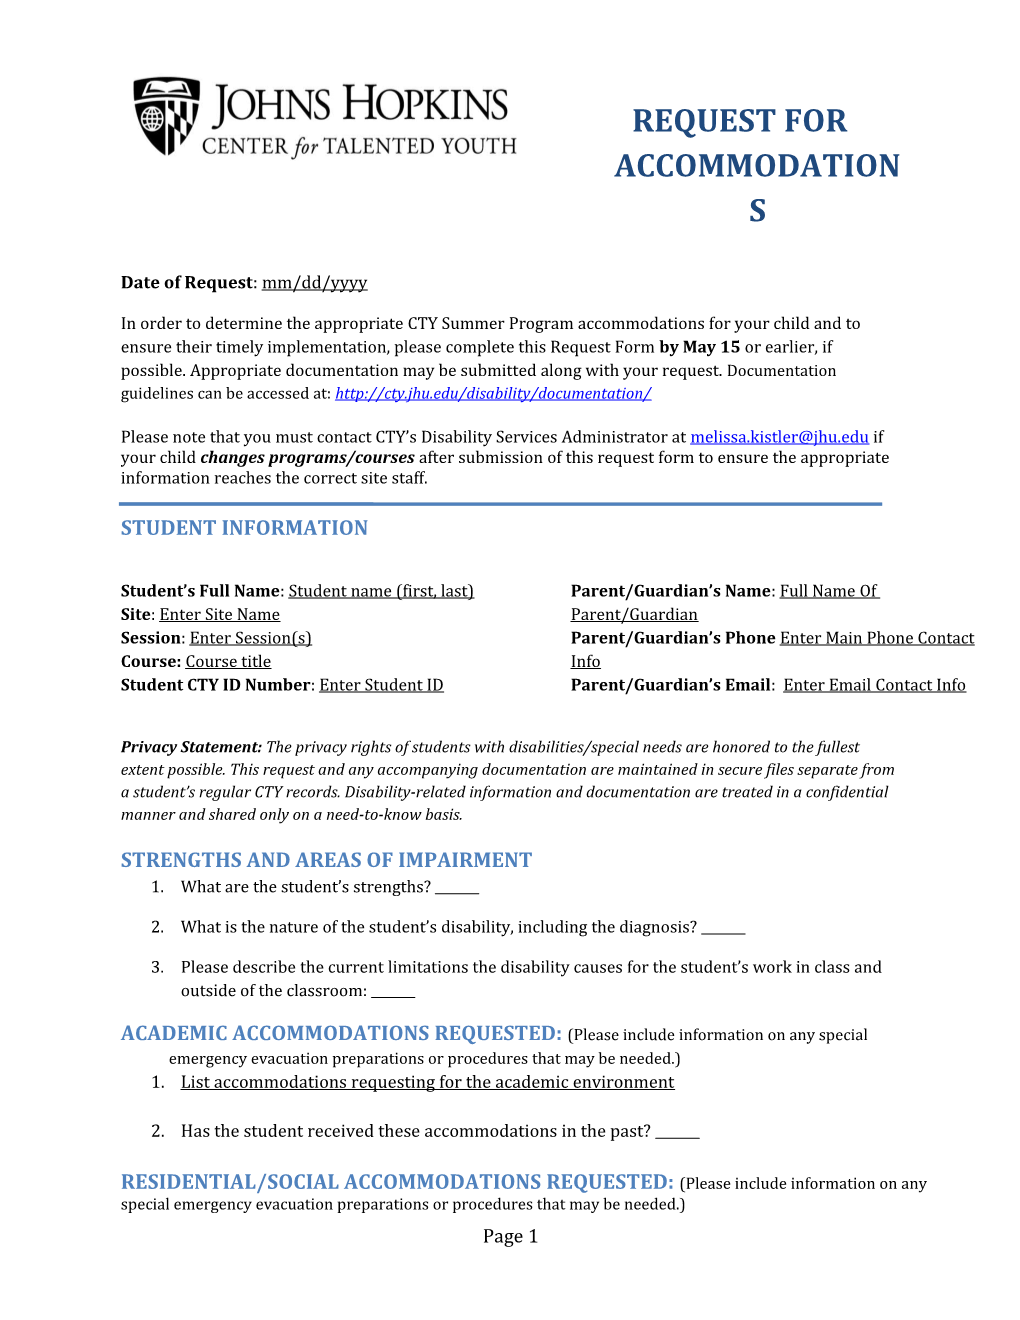 Request for Accommodations Form - CTY Summer Programs